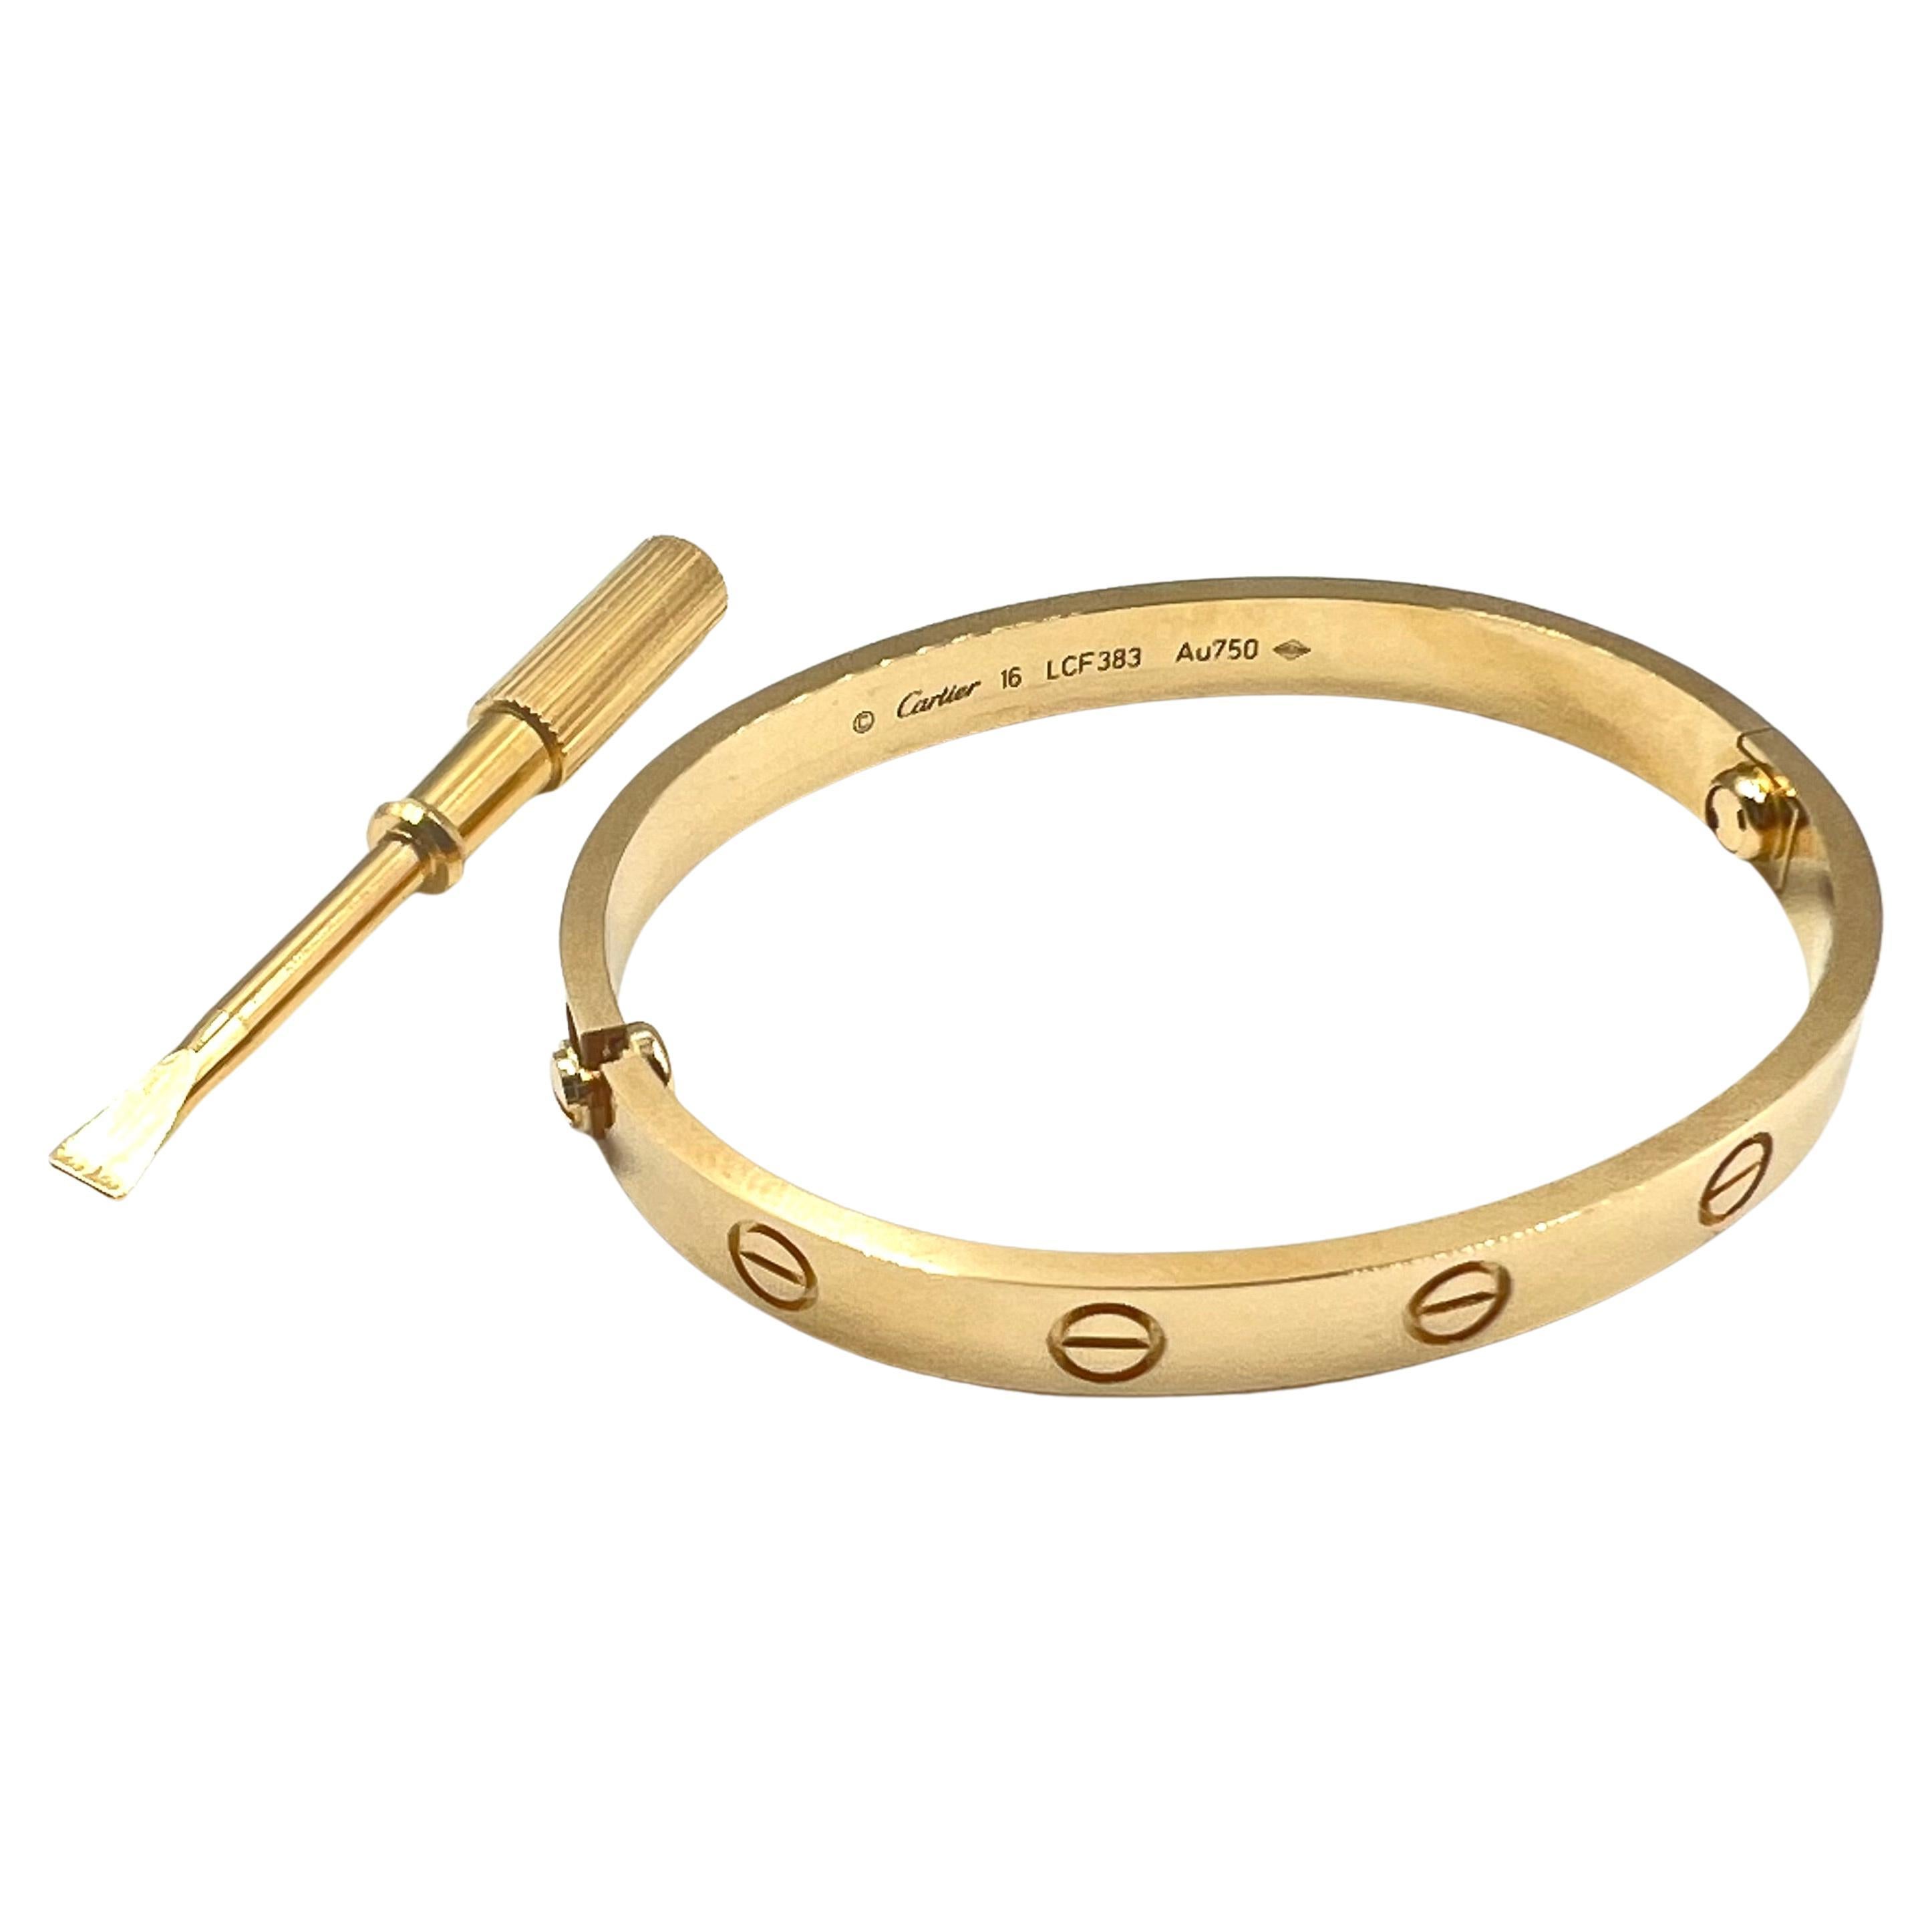 LOVE bangle bracelet in 18k yellow gold. Size 16. Signed 